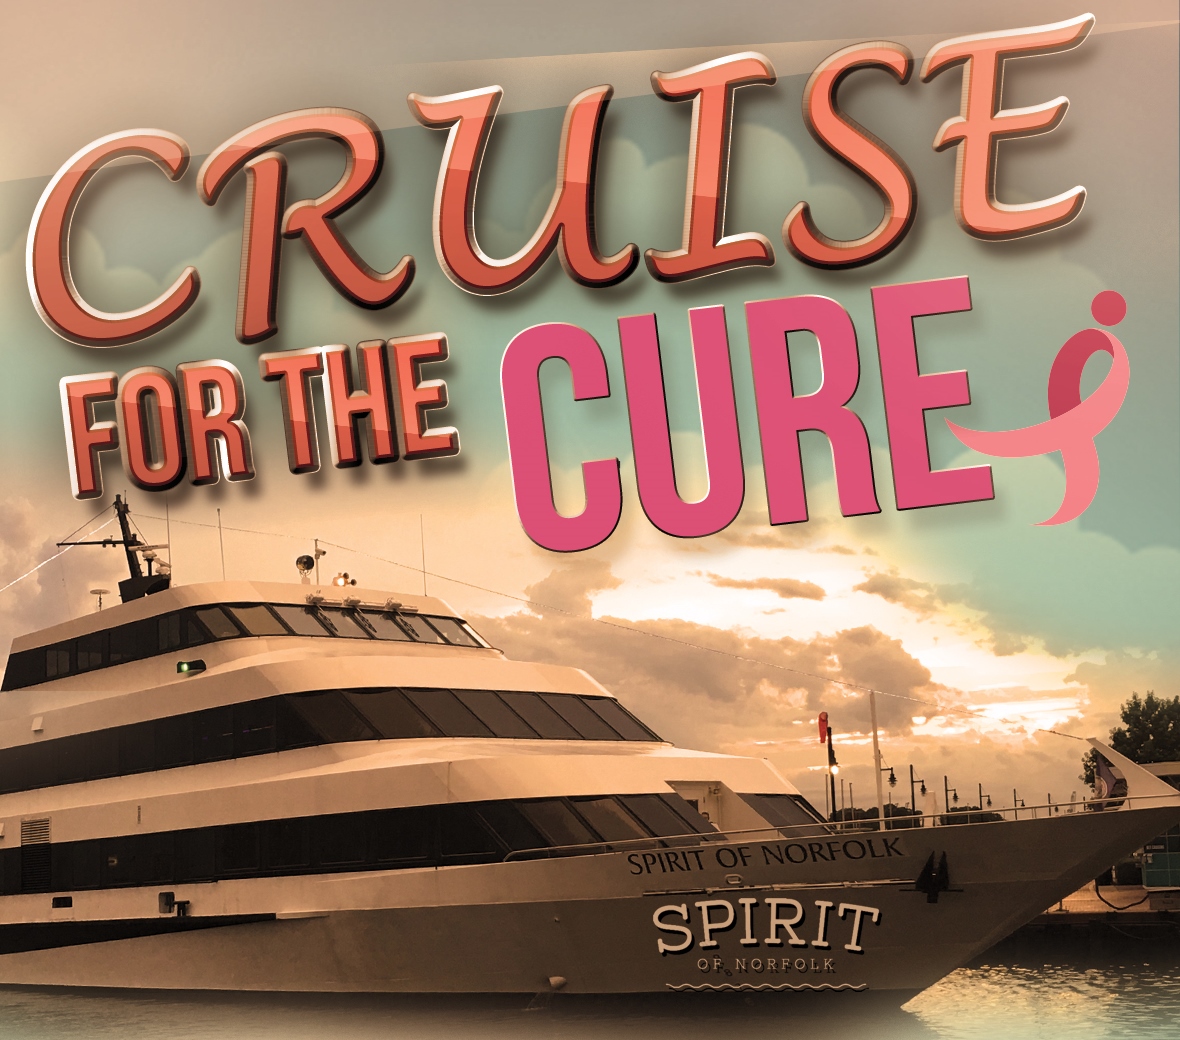 Cruise for the Cure